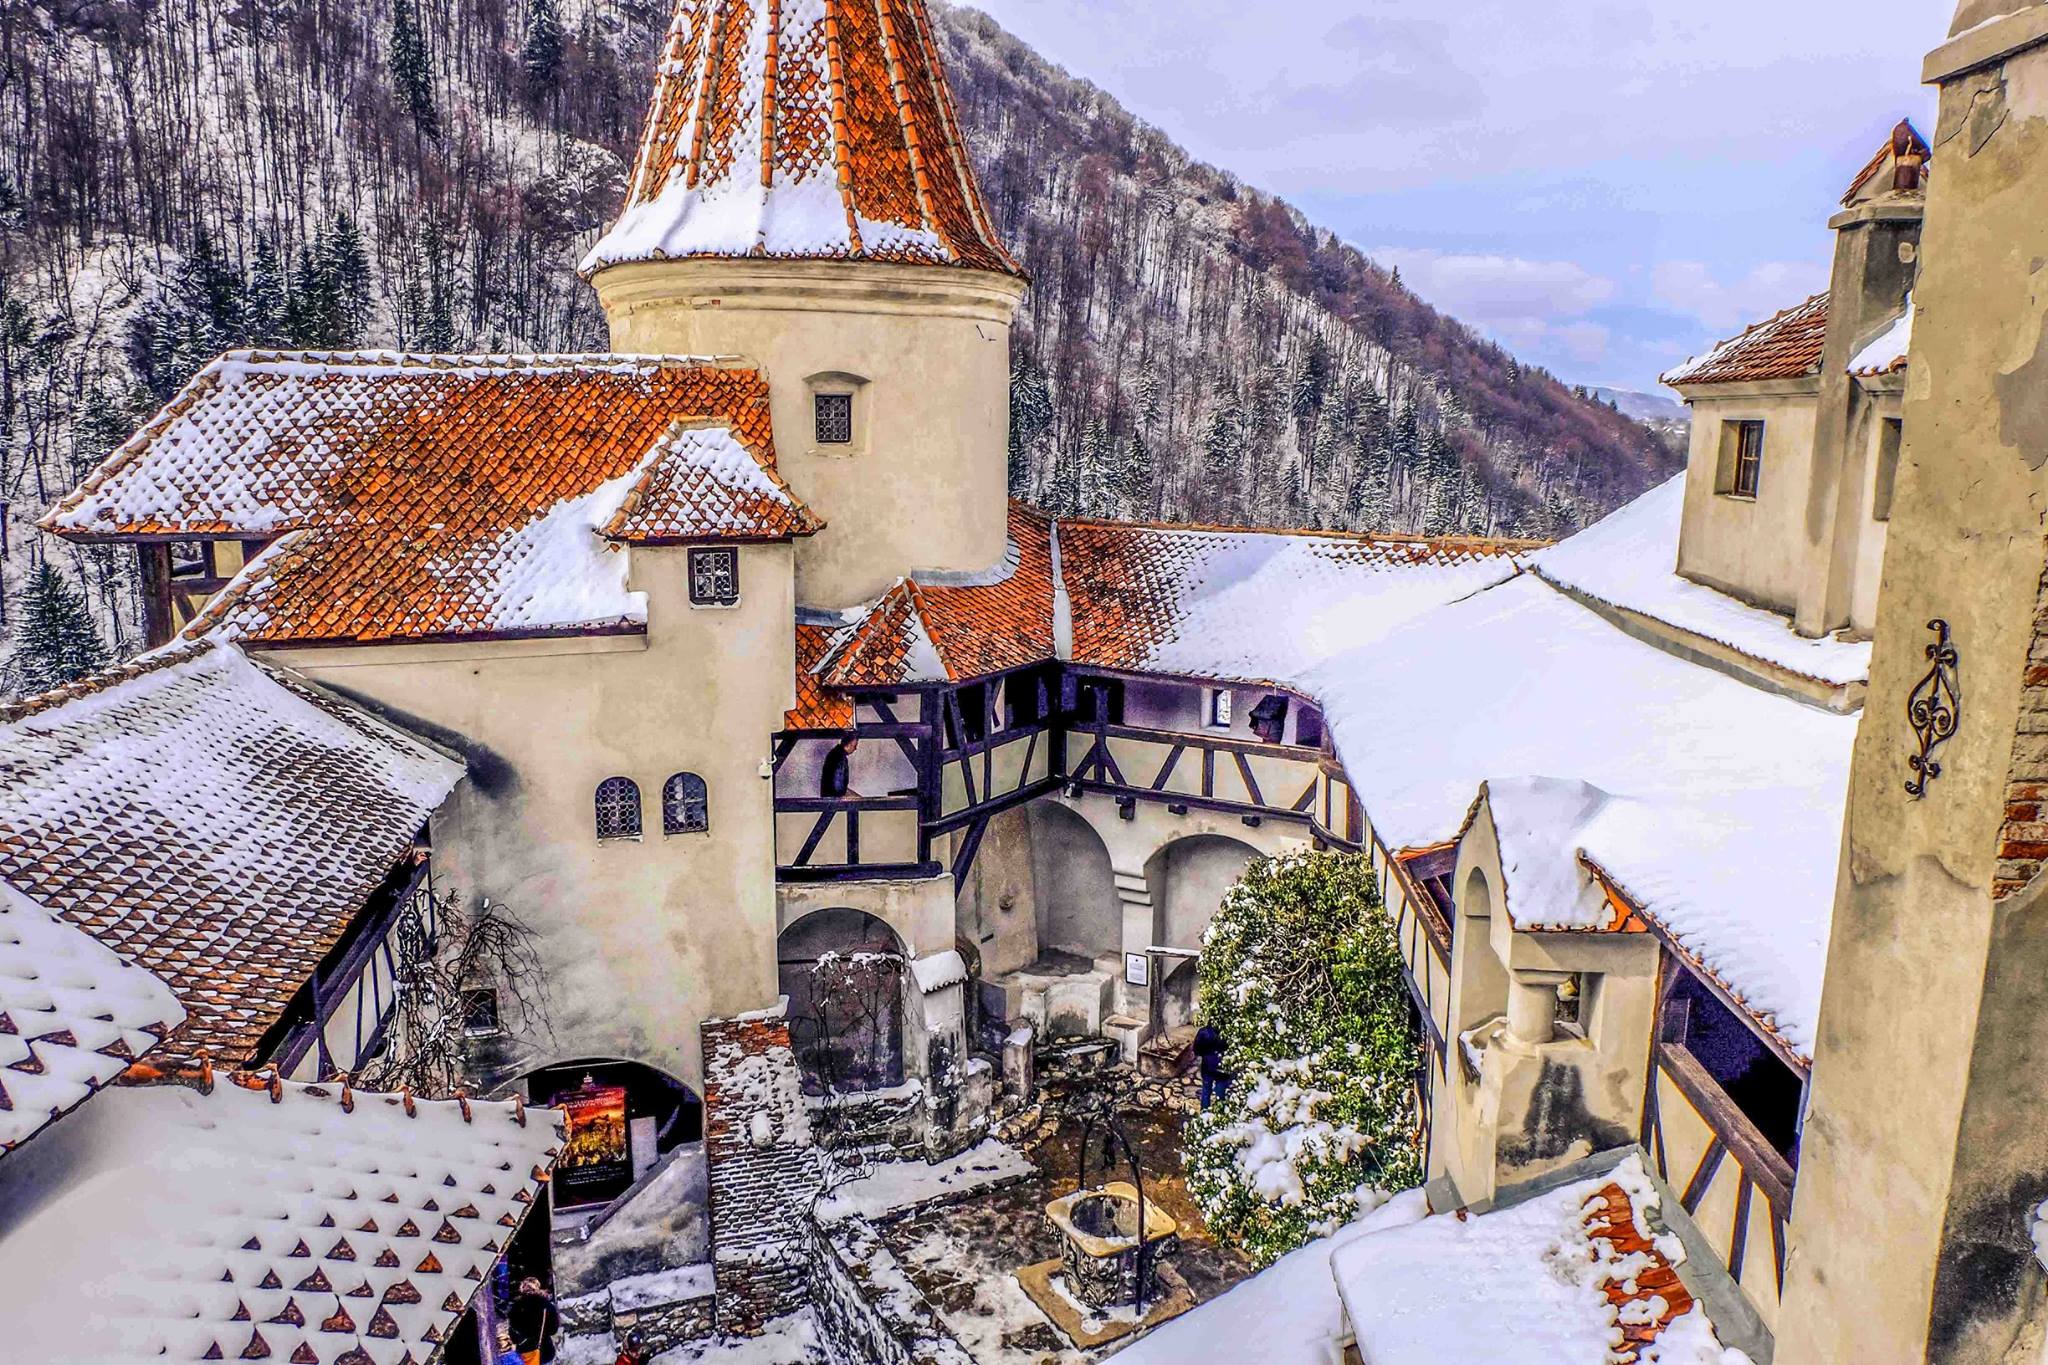 The fascinating history of Bran: a virtual tour of Dracula's Castle - RomaniaTourStore